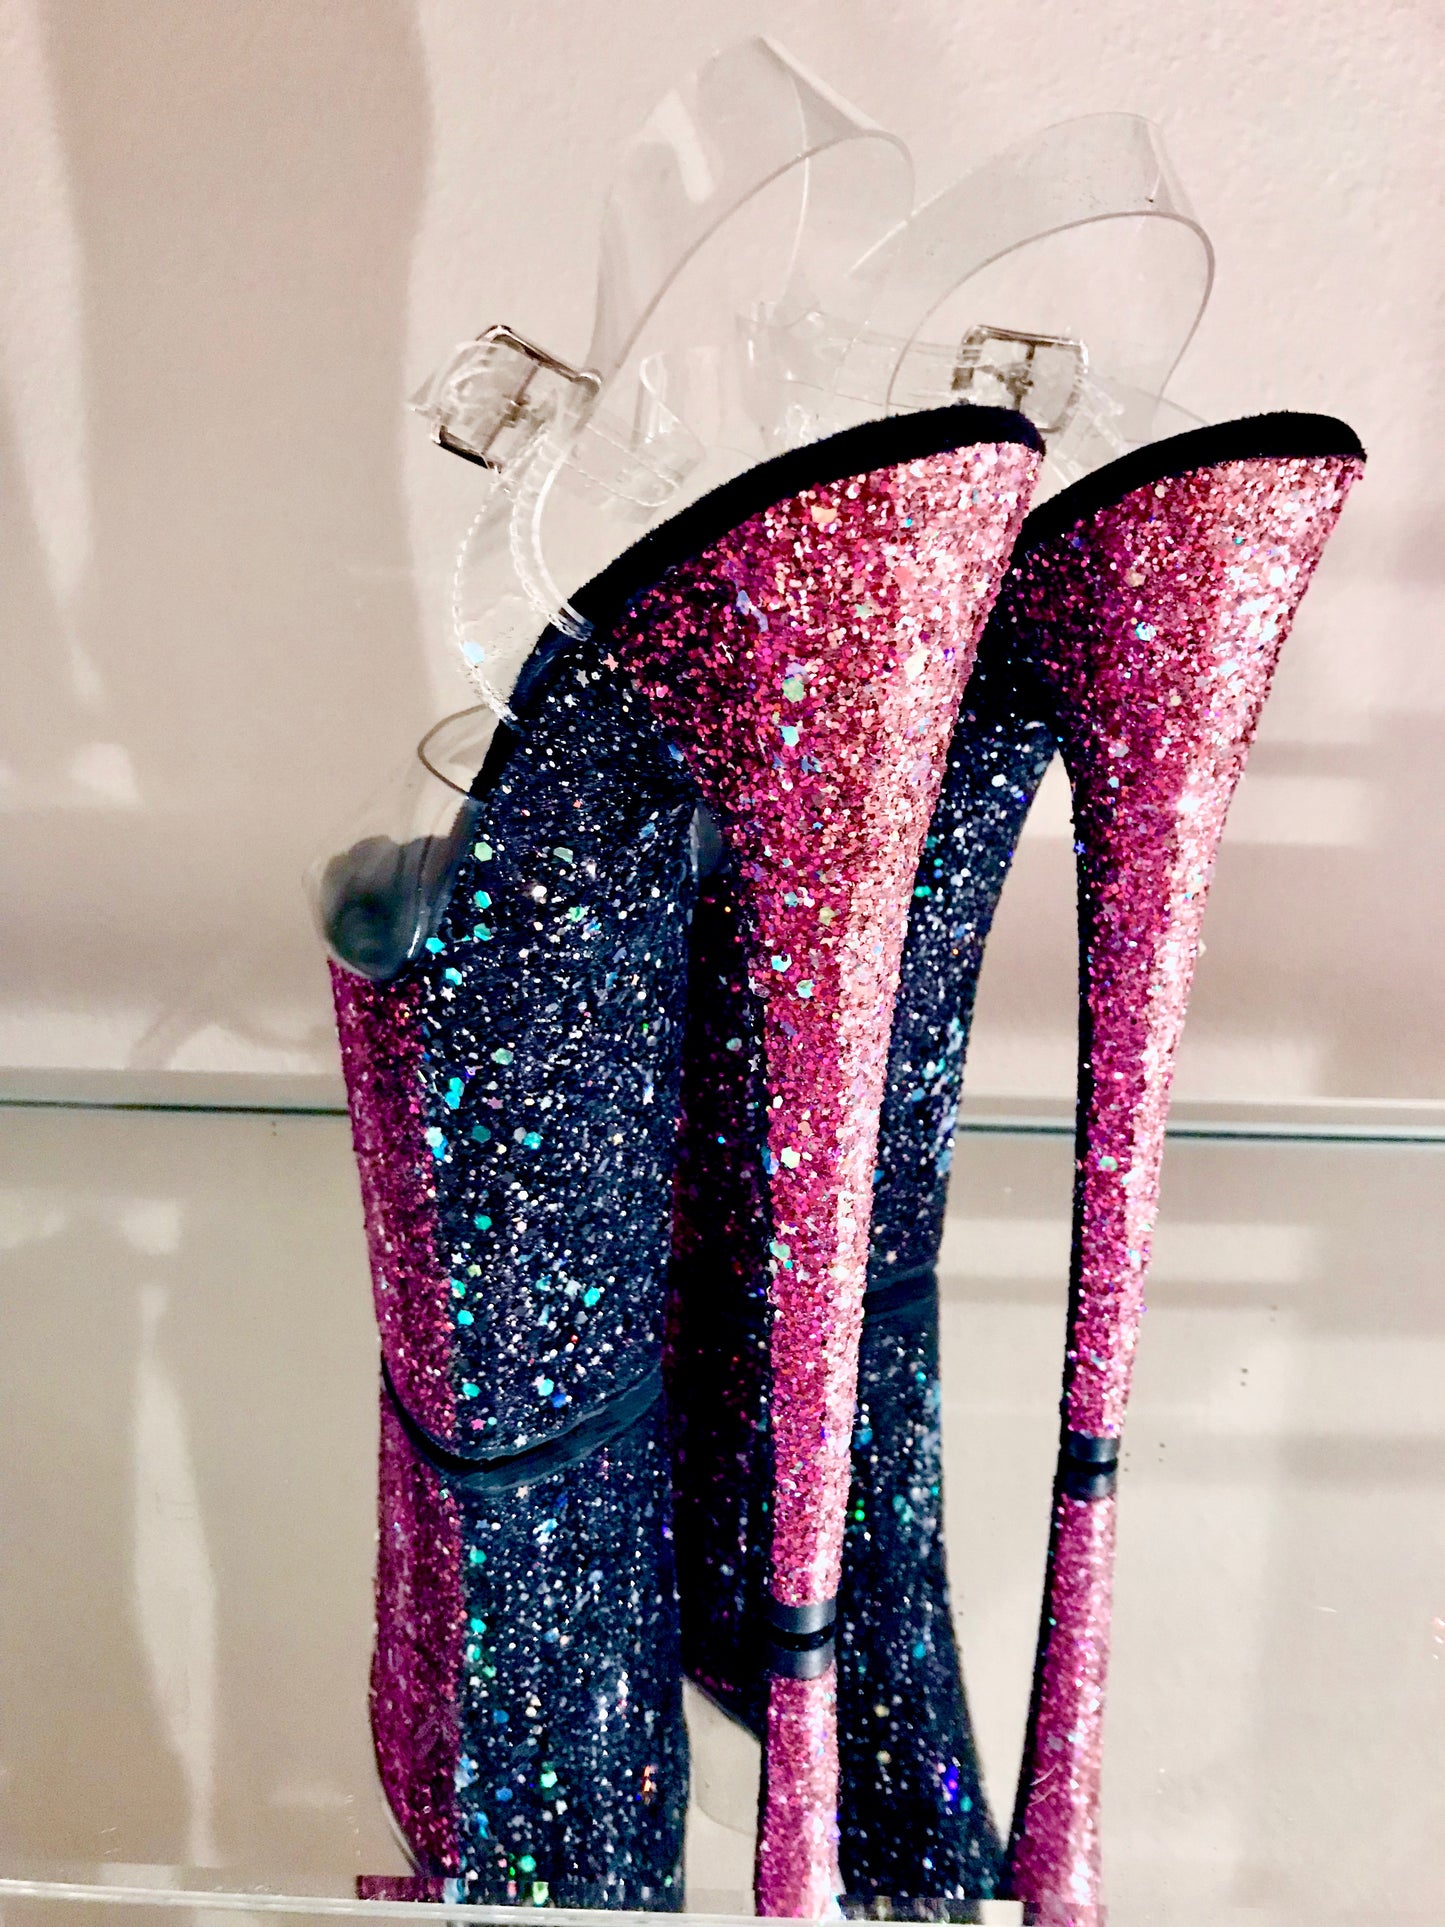 Platform heels with clear straps, and dual Ombre with blush, magenta, and black glitter. Shades of blush and magenta glitter starting at the front of the platform, and back of the heels, blending to black glitter under the arch, and down the inside of the heels. Black soles.